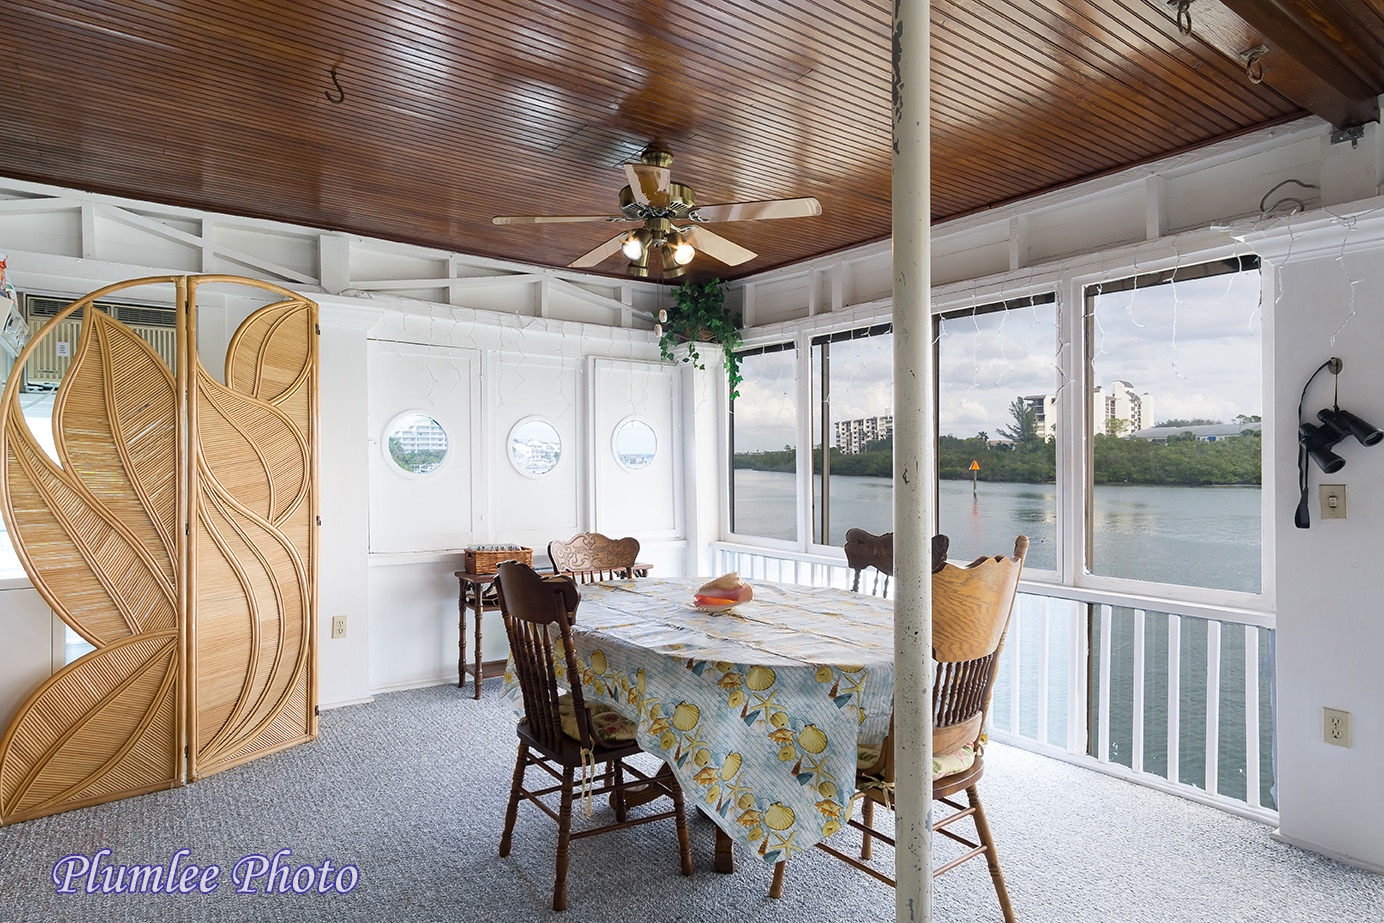 2nd Floor.  Porthole windows and a great view of the Intracoastal.